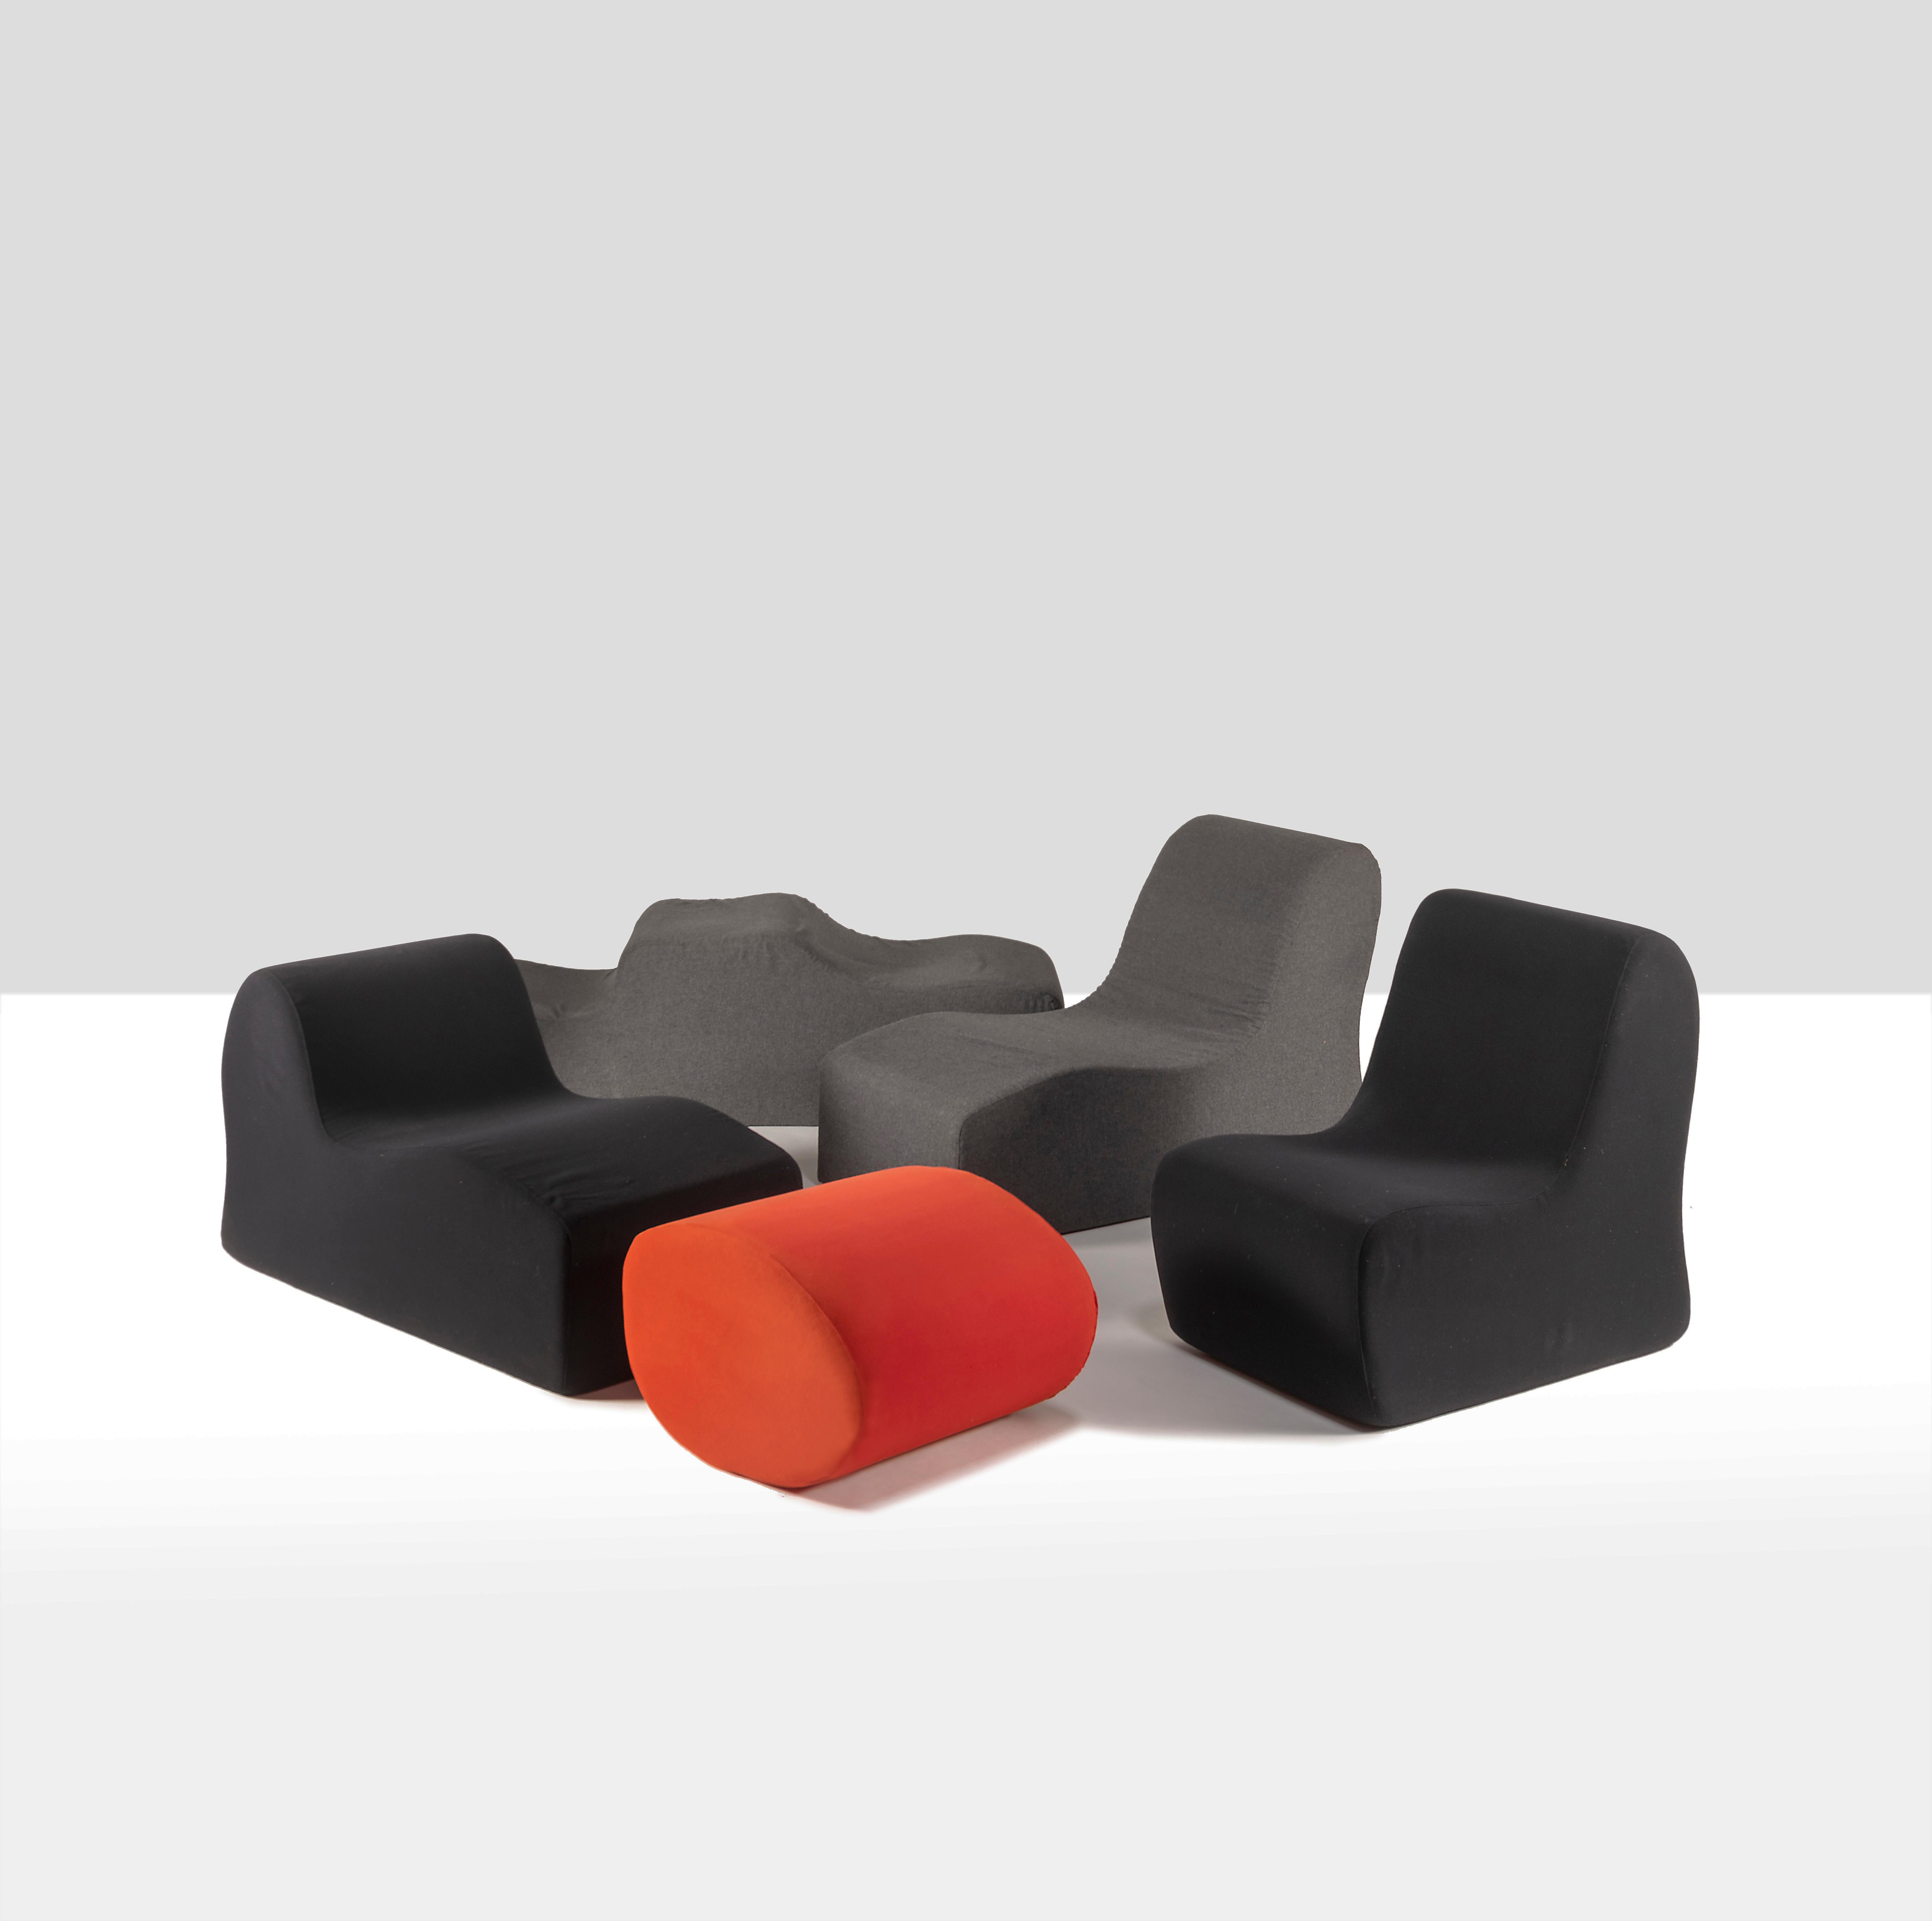 malitte seating system